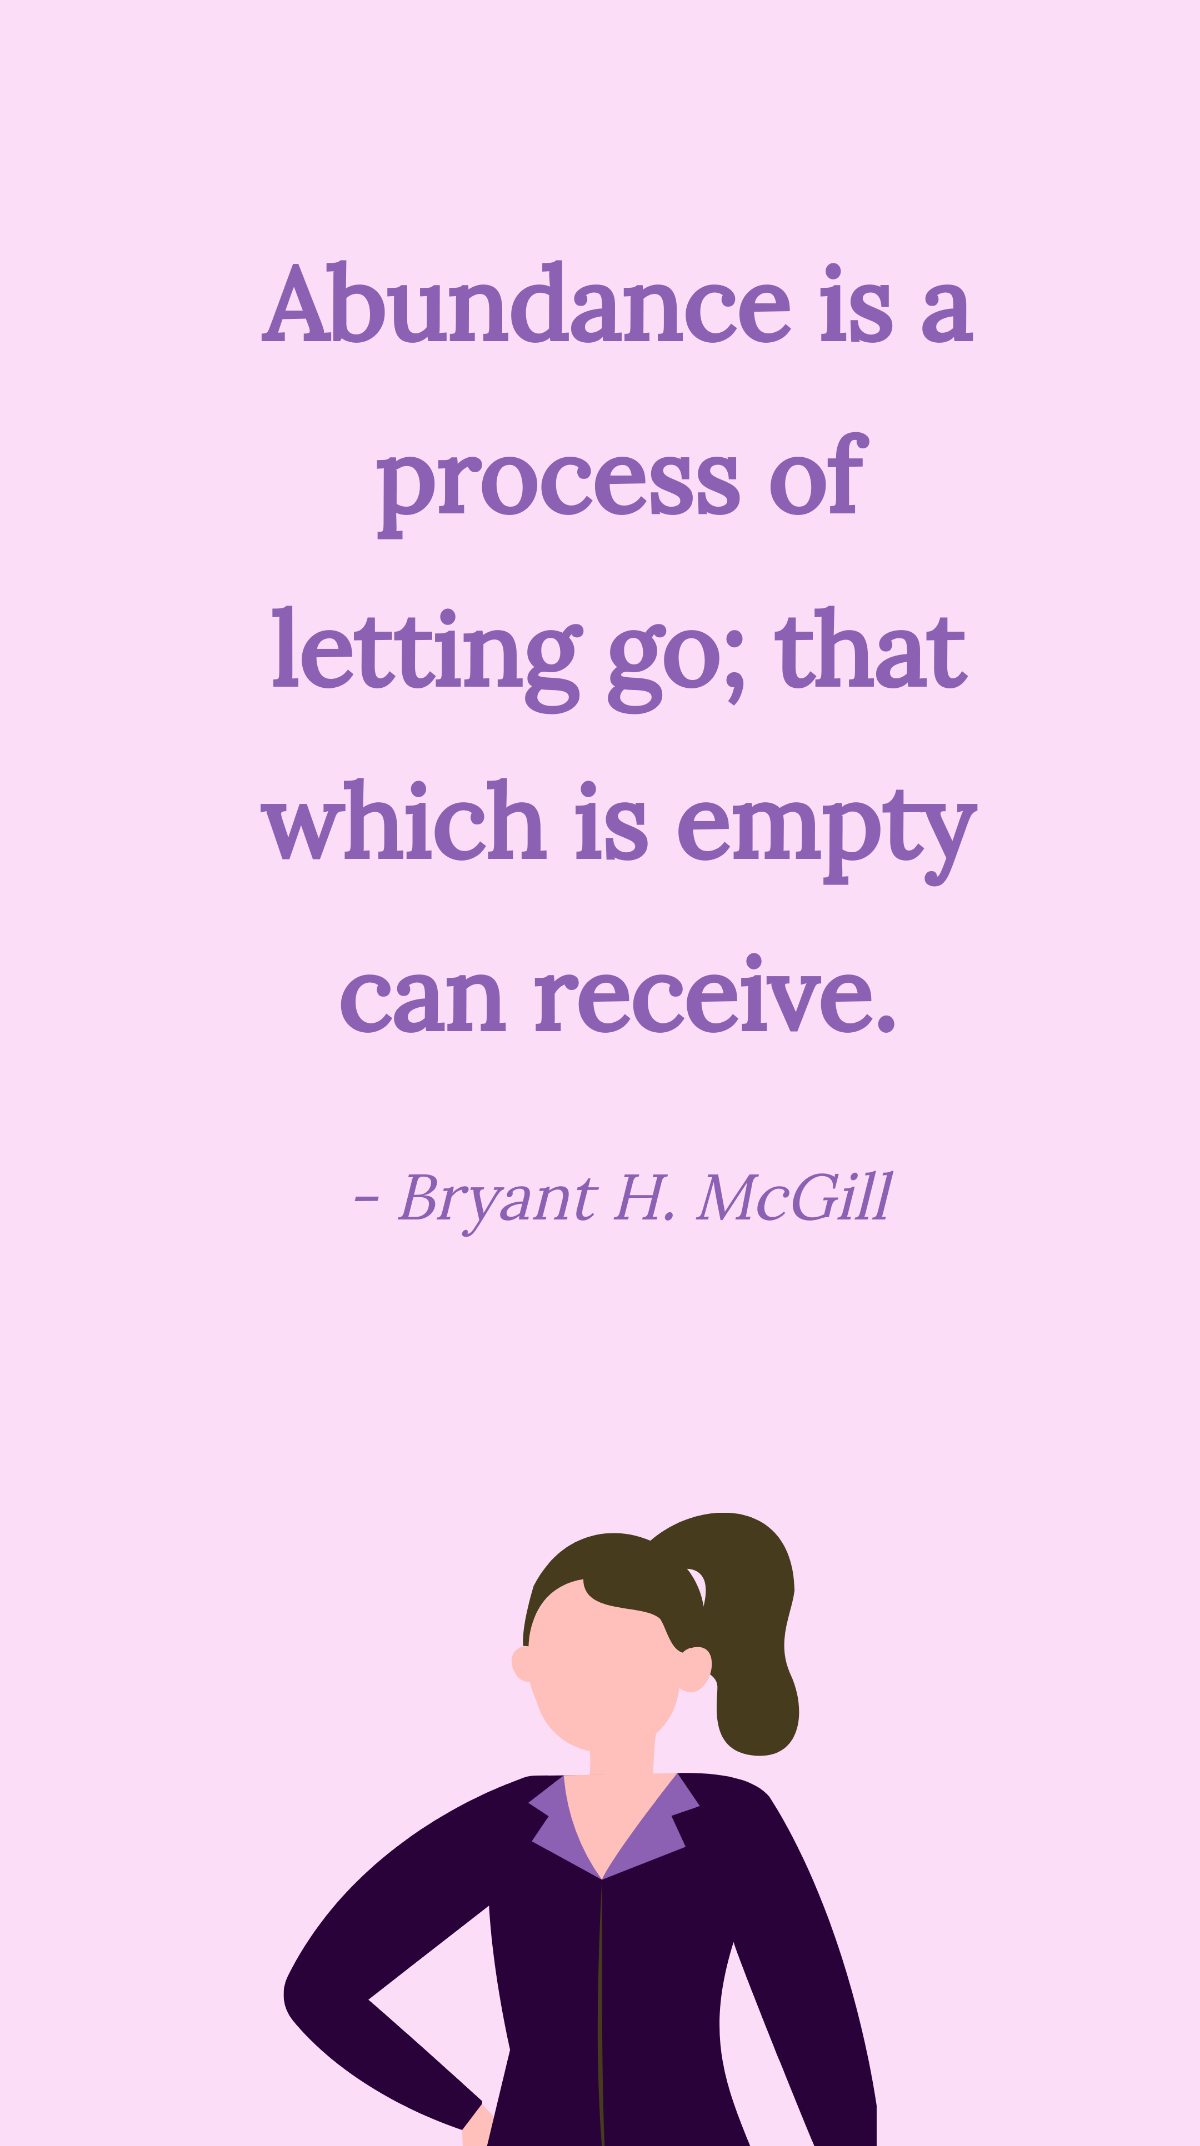 Bryant H. McGill - Abundance is a process of letting go; that which is empty can receive. Template